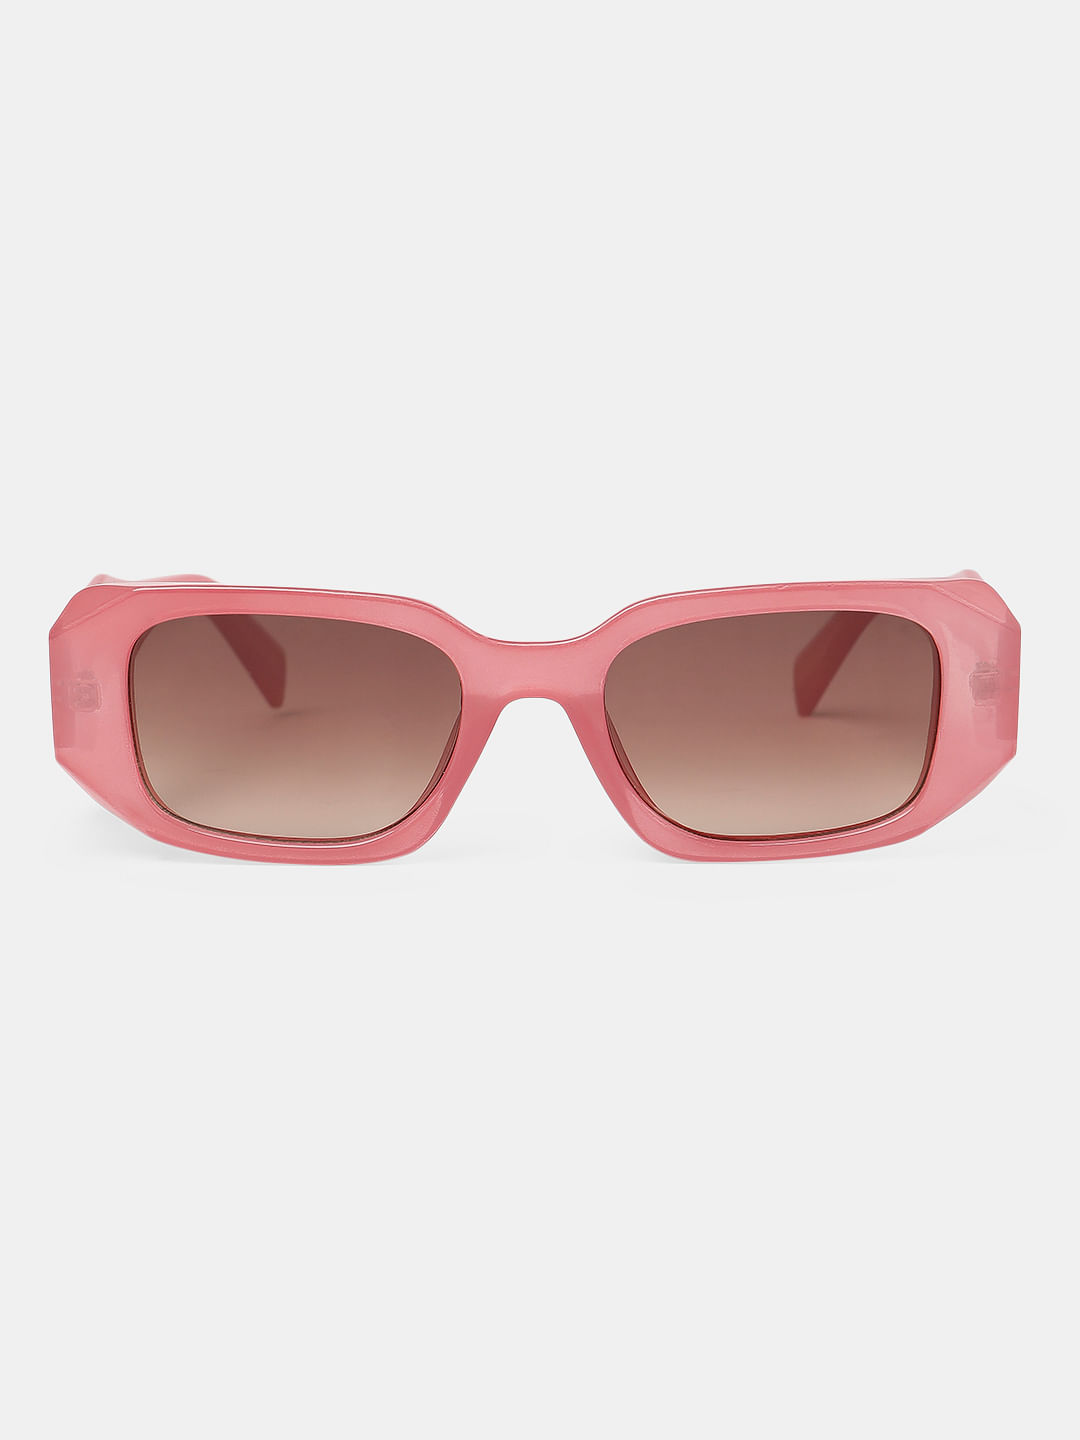 Icebox - Cartier Glasses Iced Out Diamonds Rimless - Pink Fade Lens -  1.15ctw